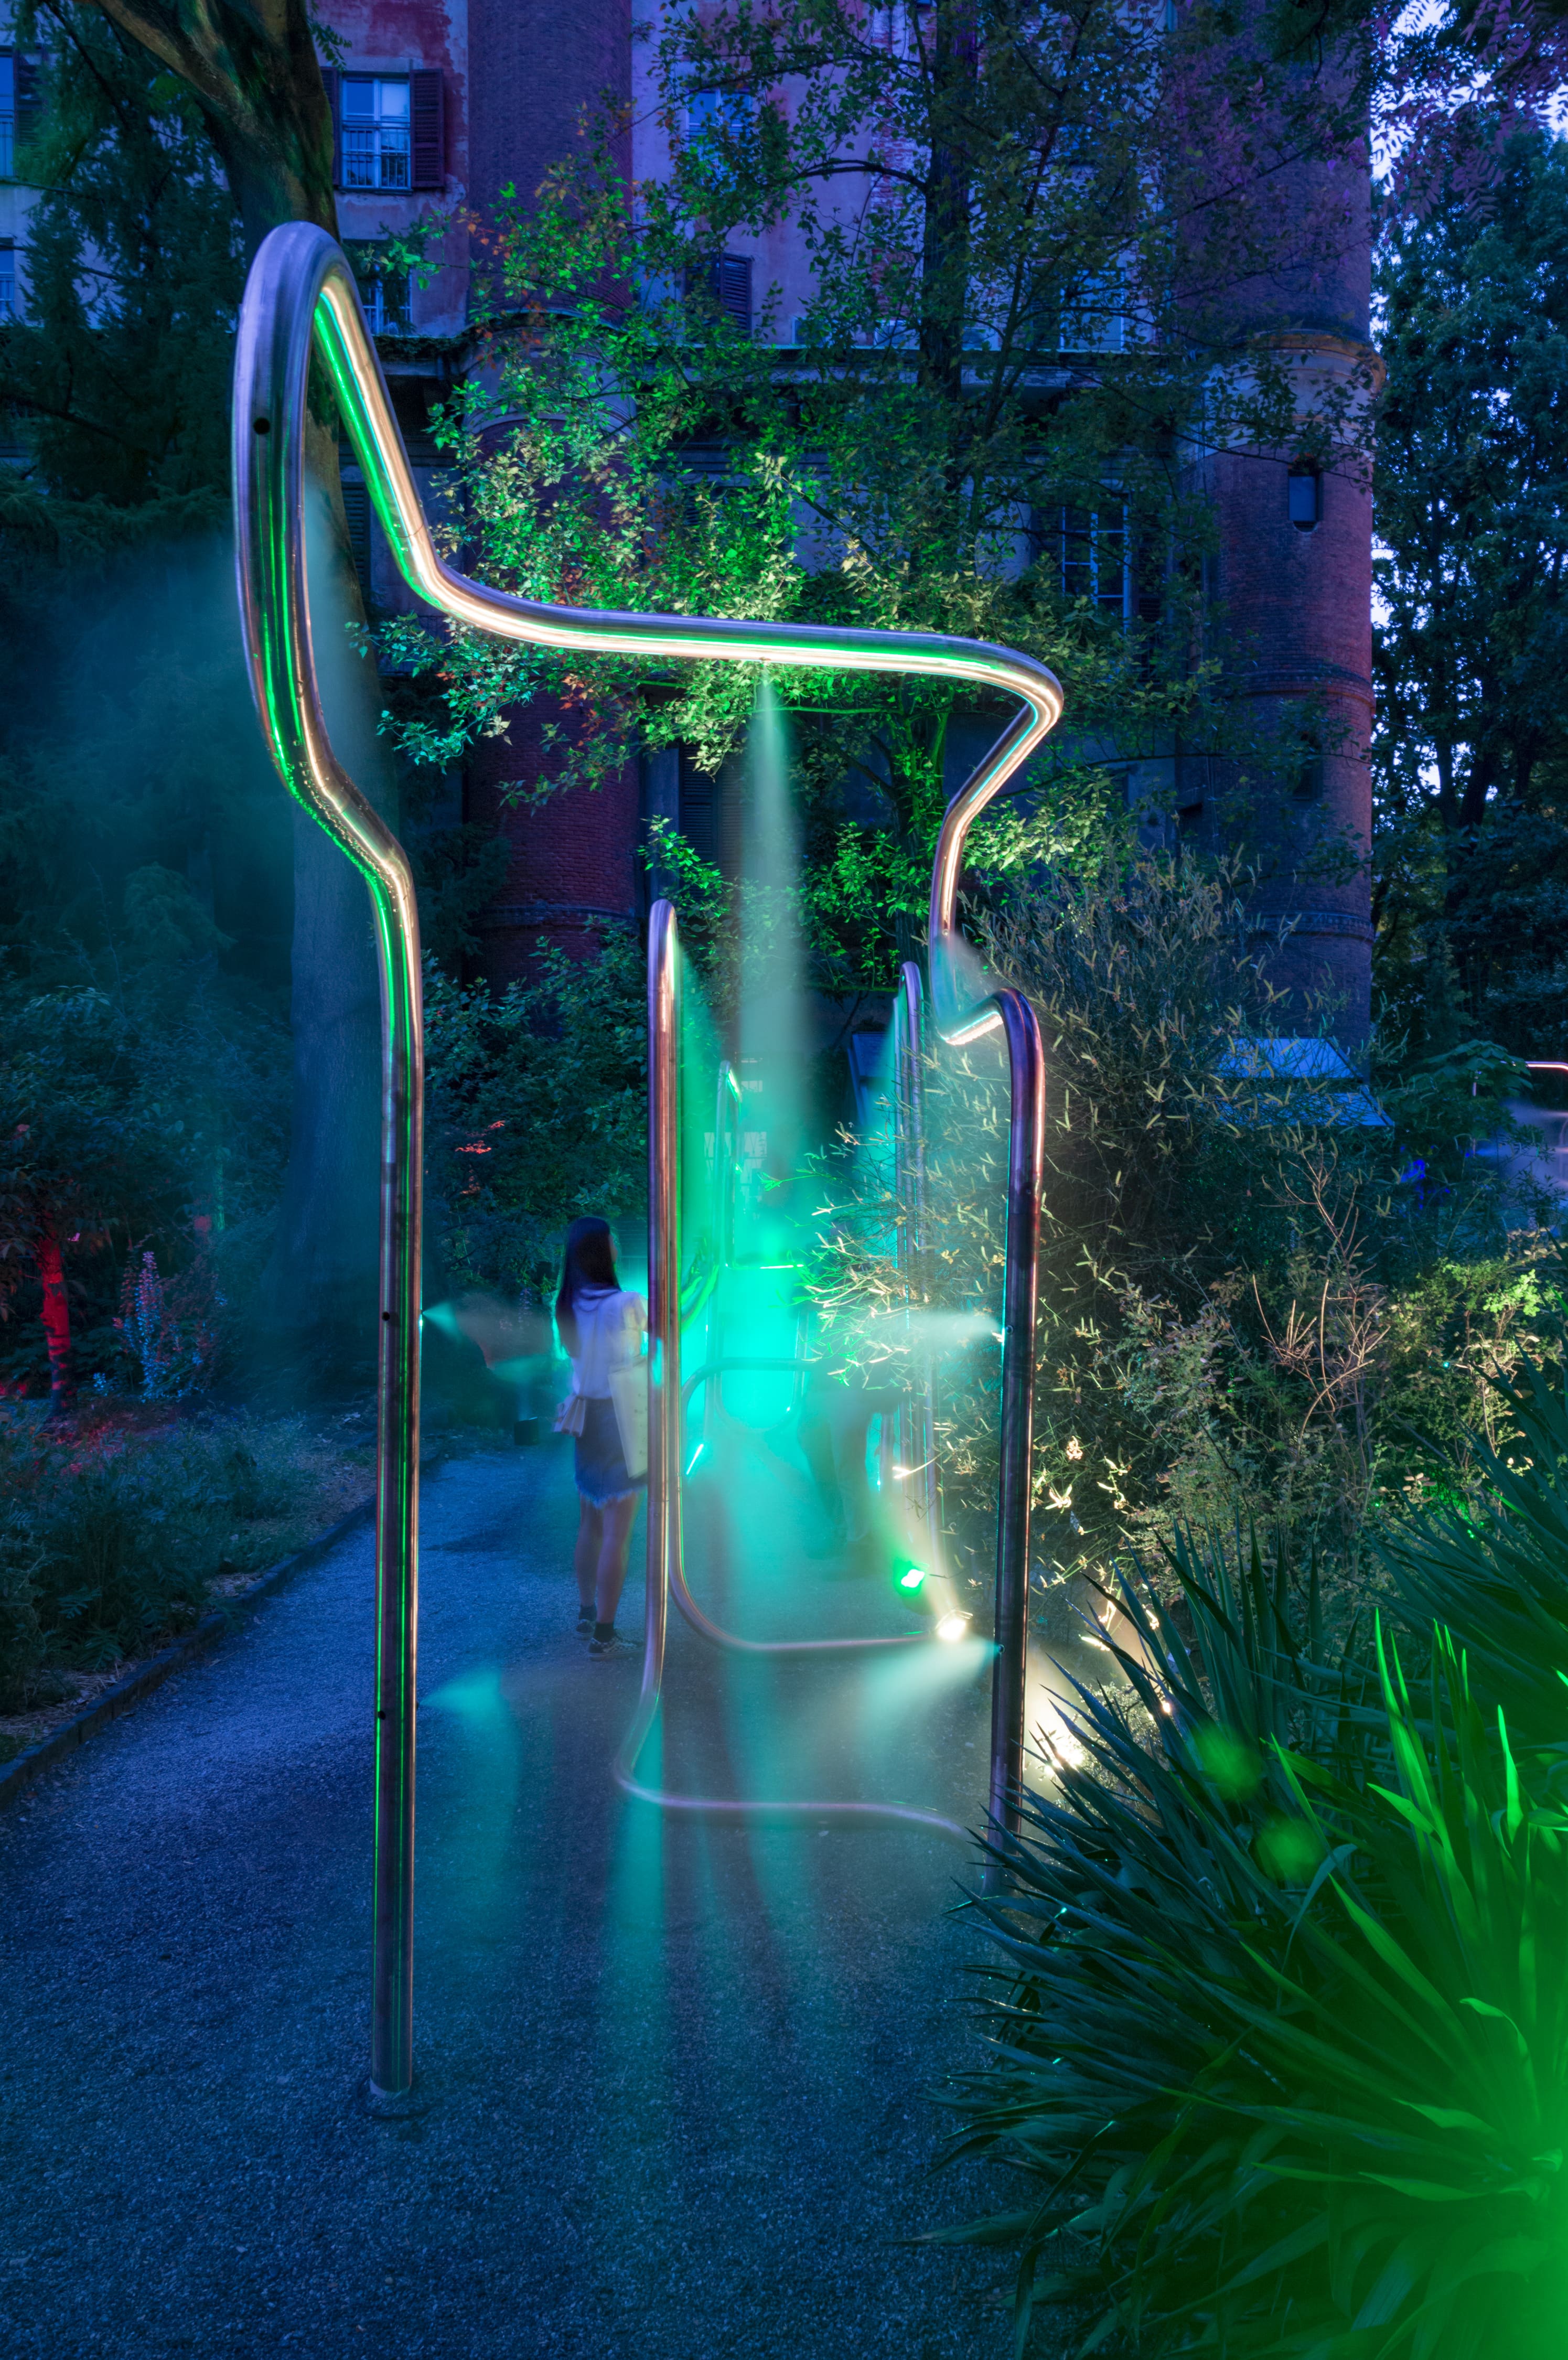 Feeling the Energy installation can work with the help of solar energy, wind, and human movement